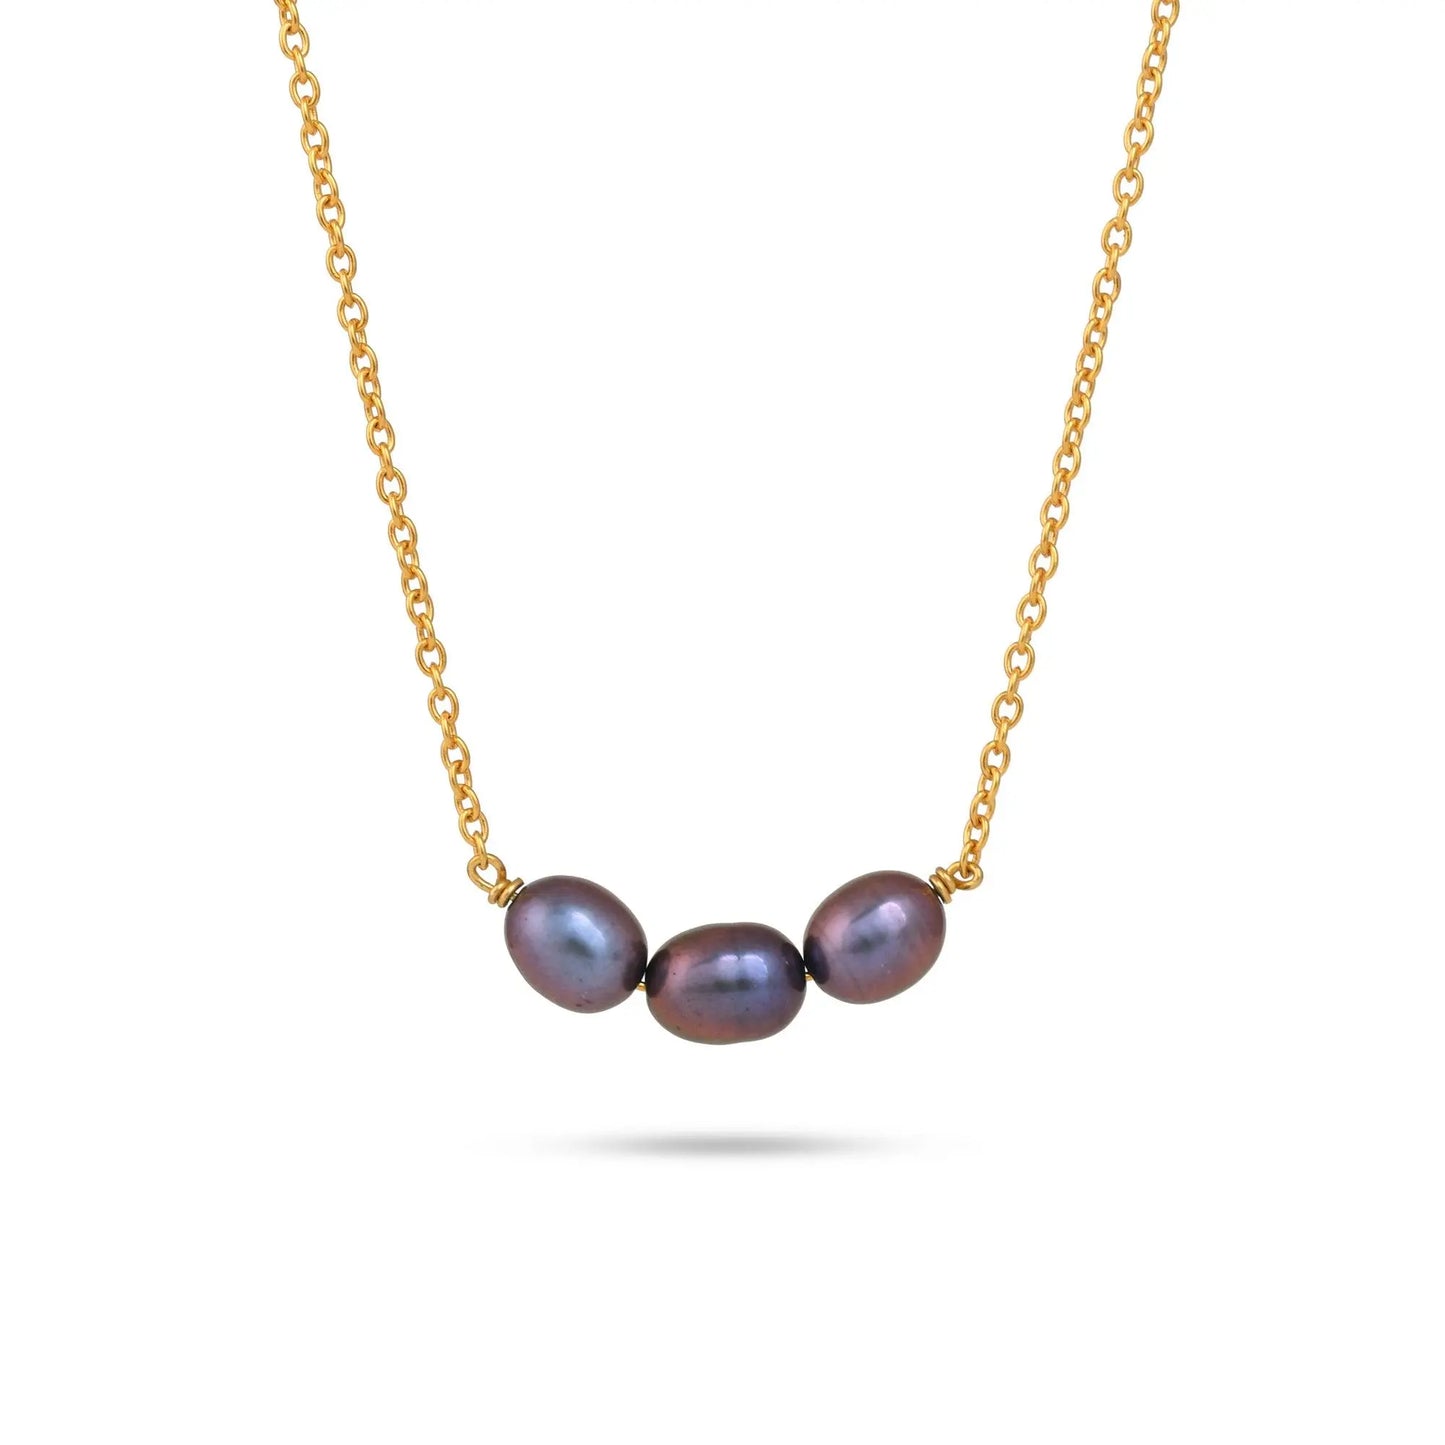 Natural Black Pearl Trio Necklace| 925 Silver| 18kt Gold Plated - From Purl Purl